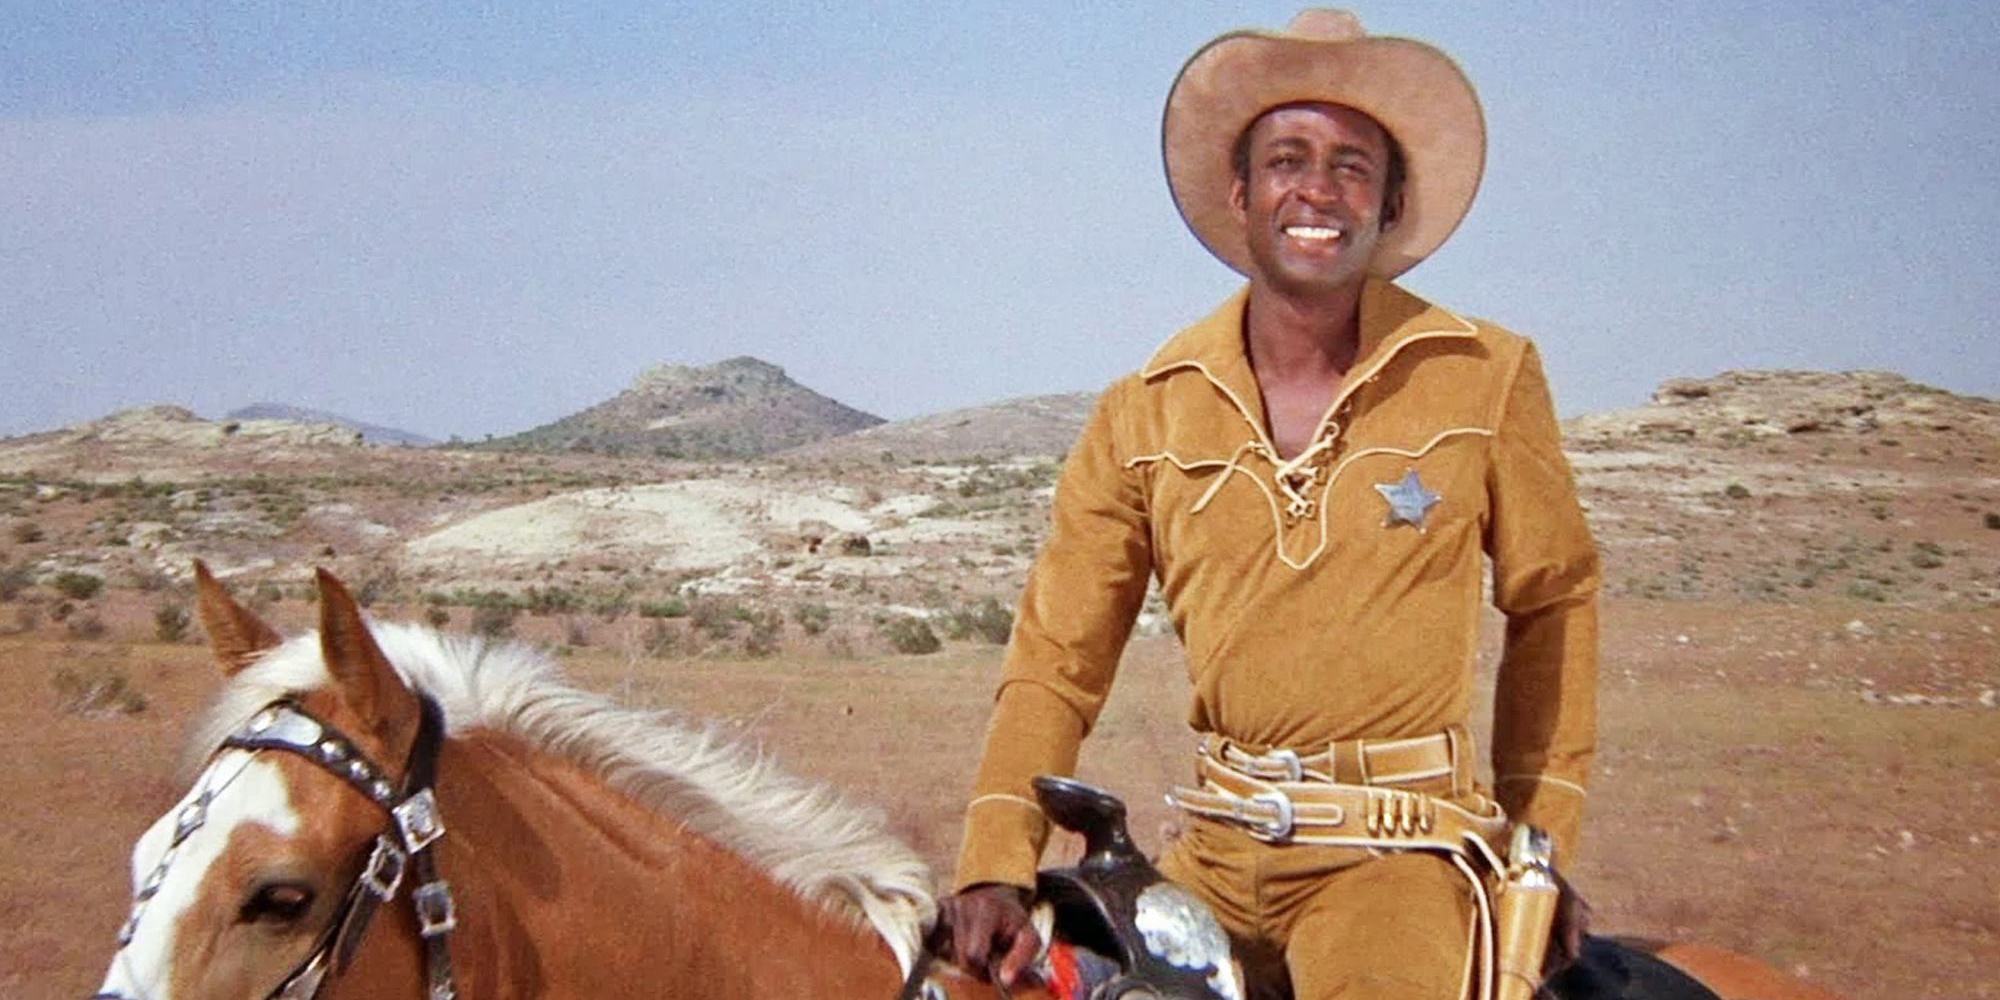 Little Cleavon riding a horse in a sheriff's uniform and smiling with a flaming Saddle on